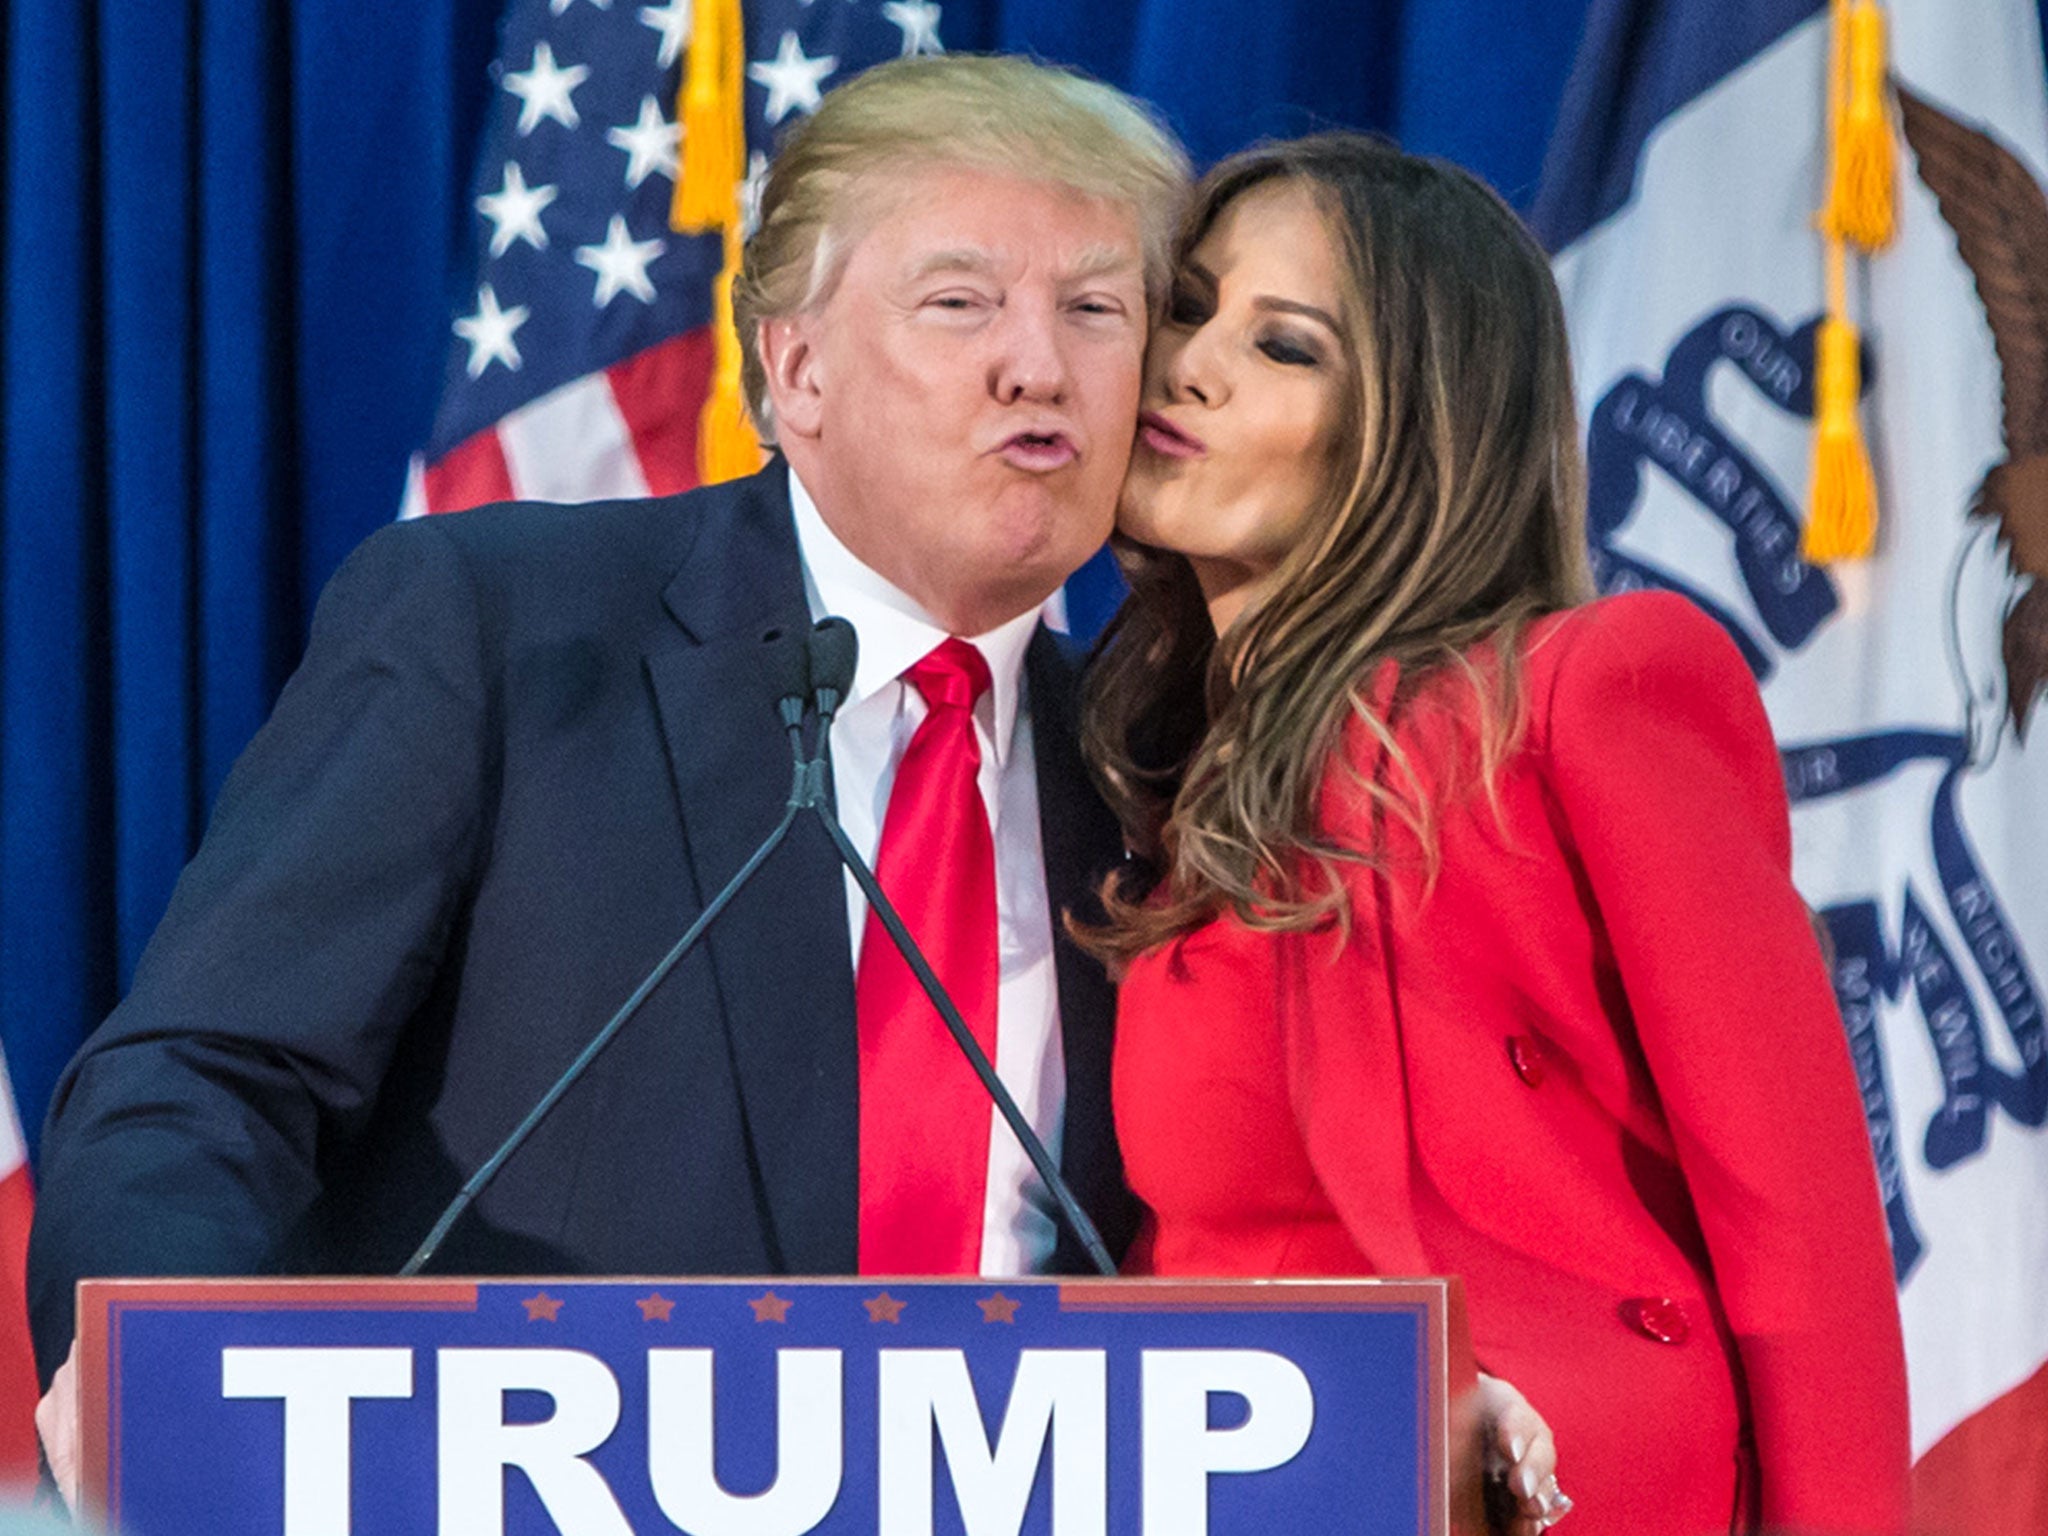 Donald Trump on the campaign trail with his wife Melania